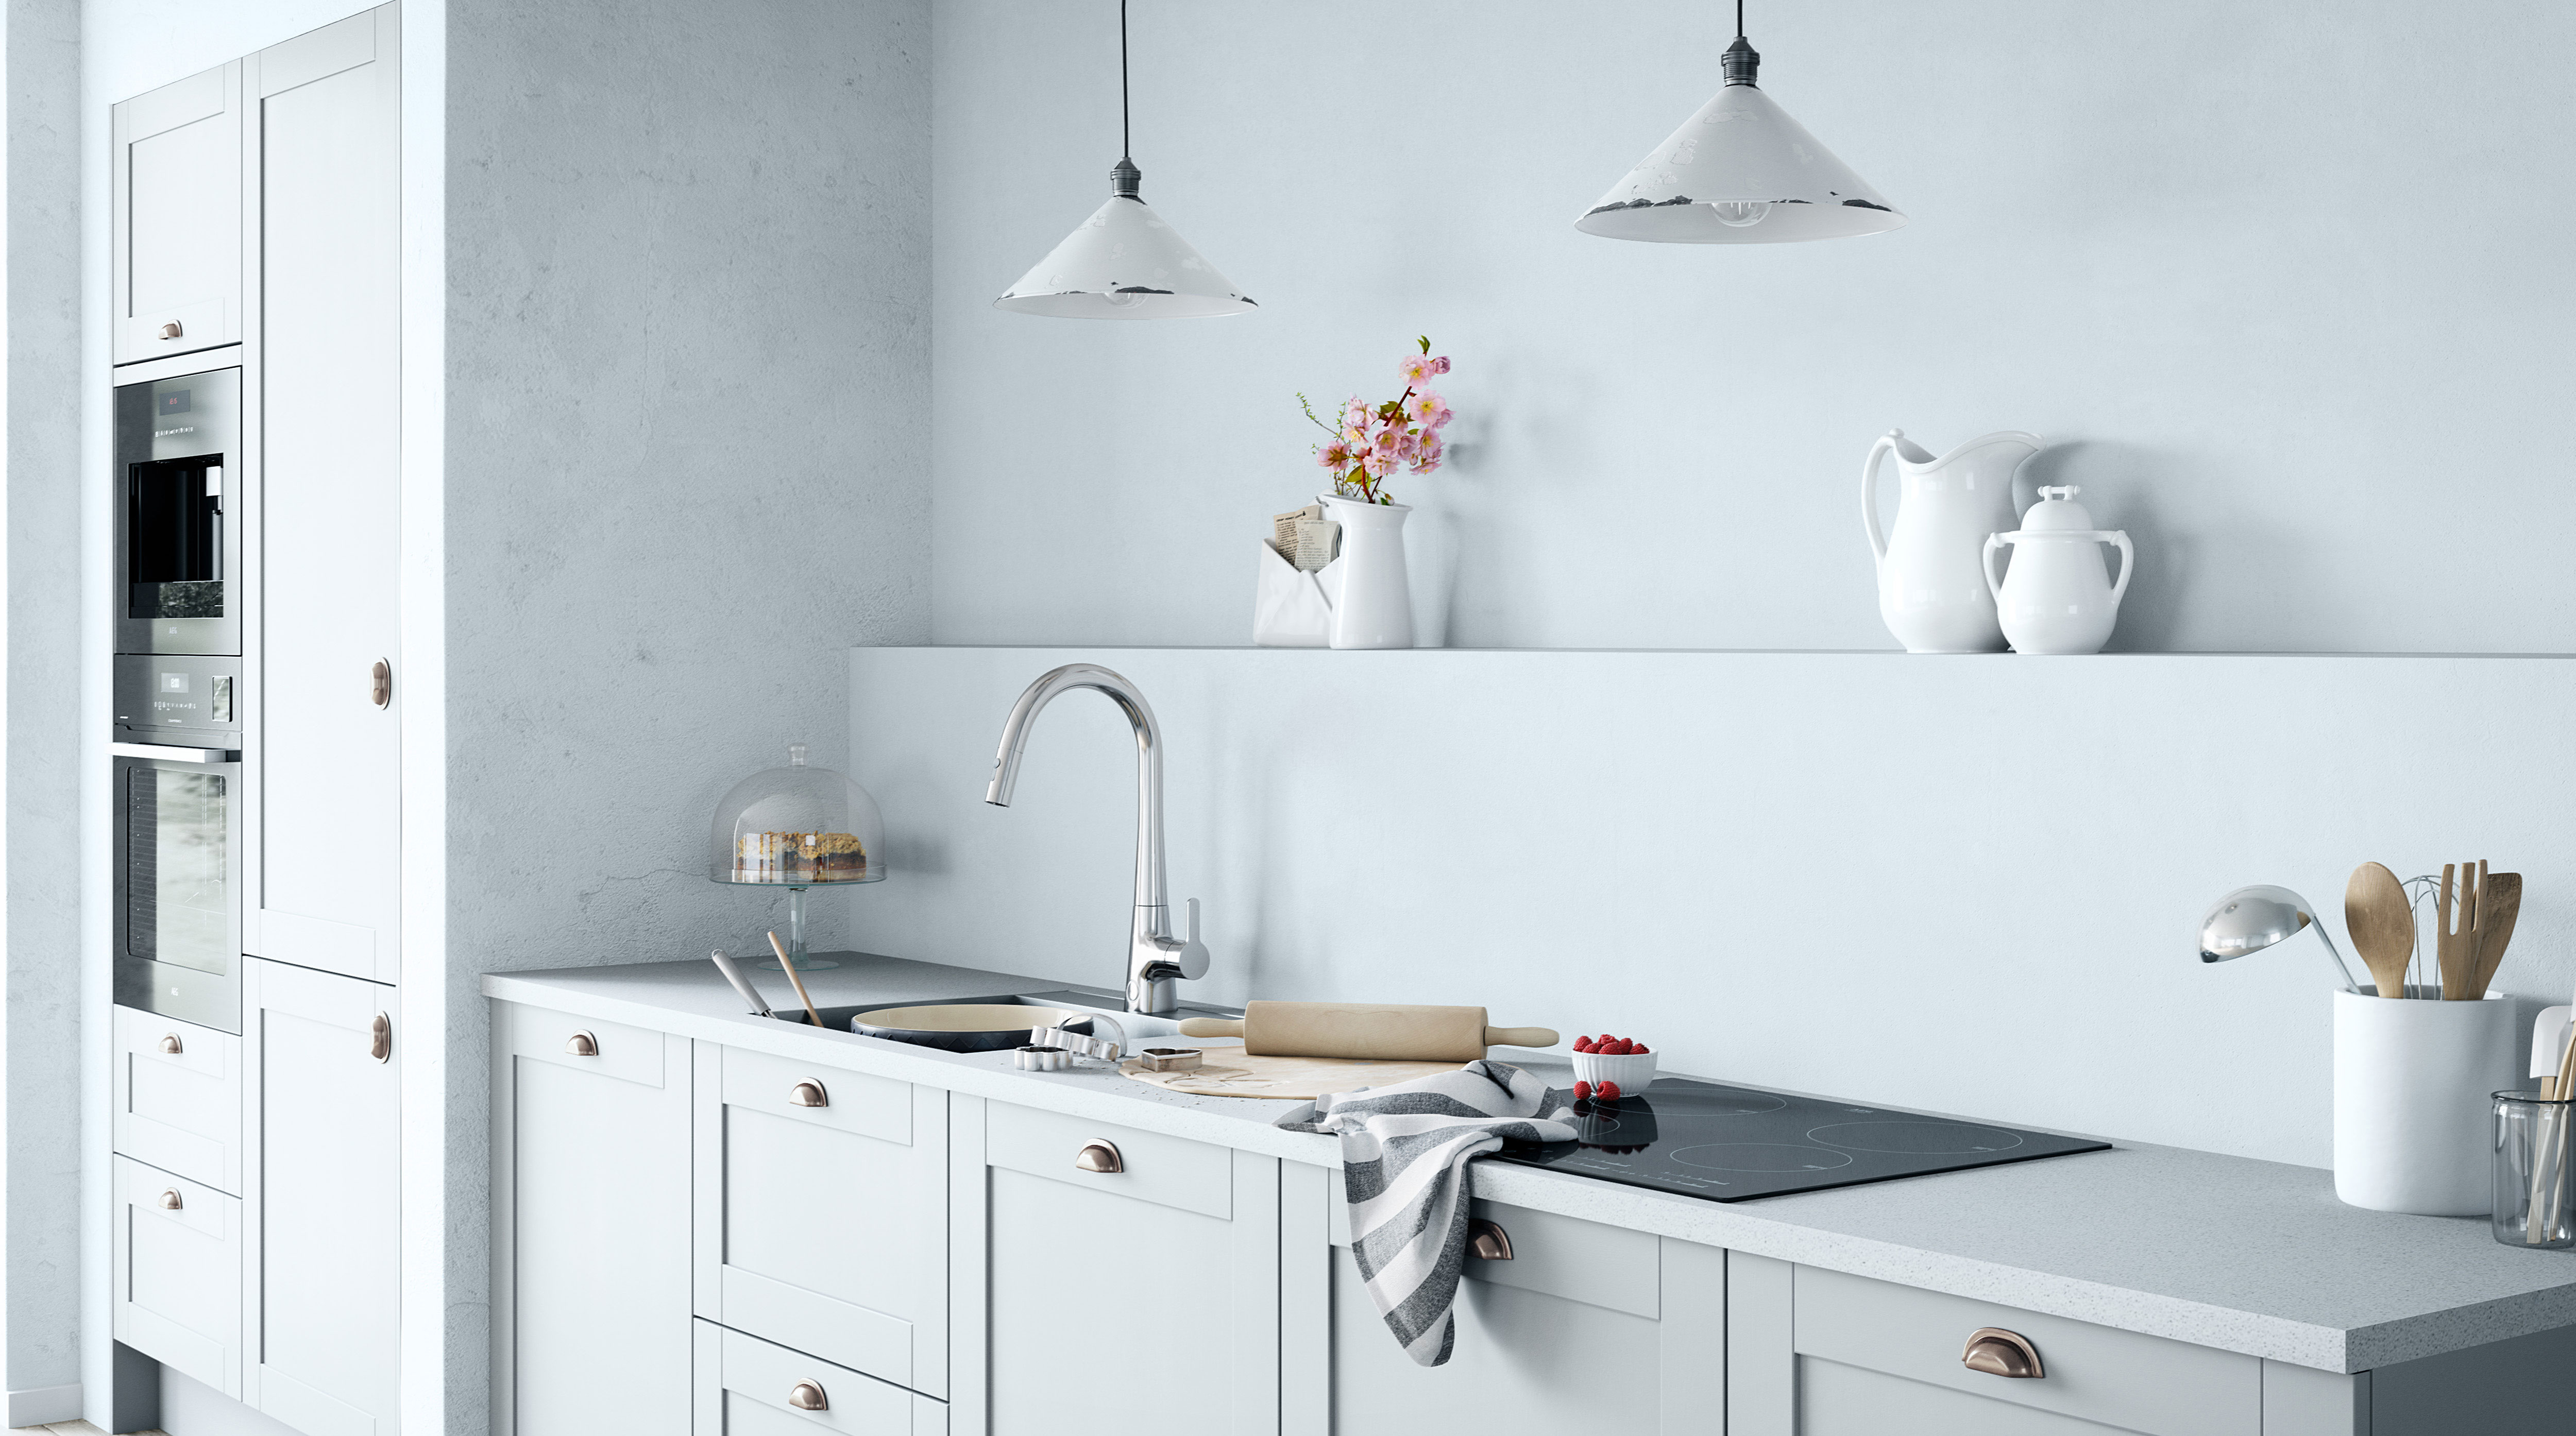 The Oras Inspera kitchen faucets fits into every type of home decor.